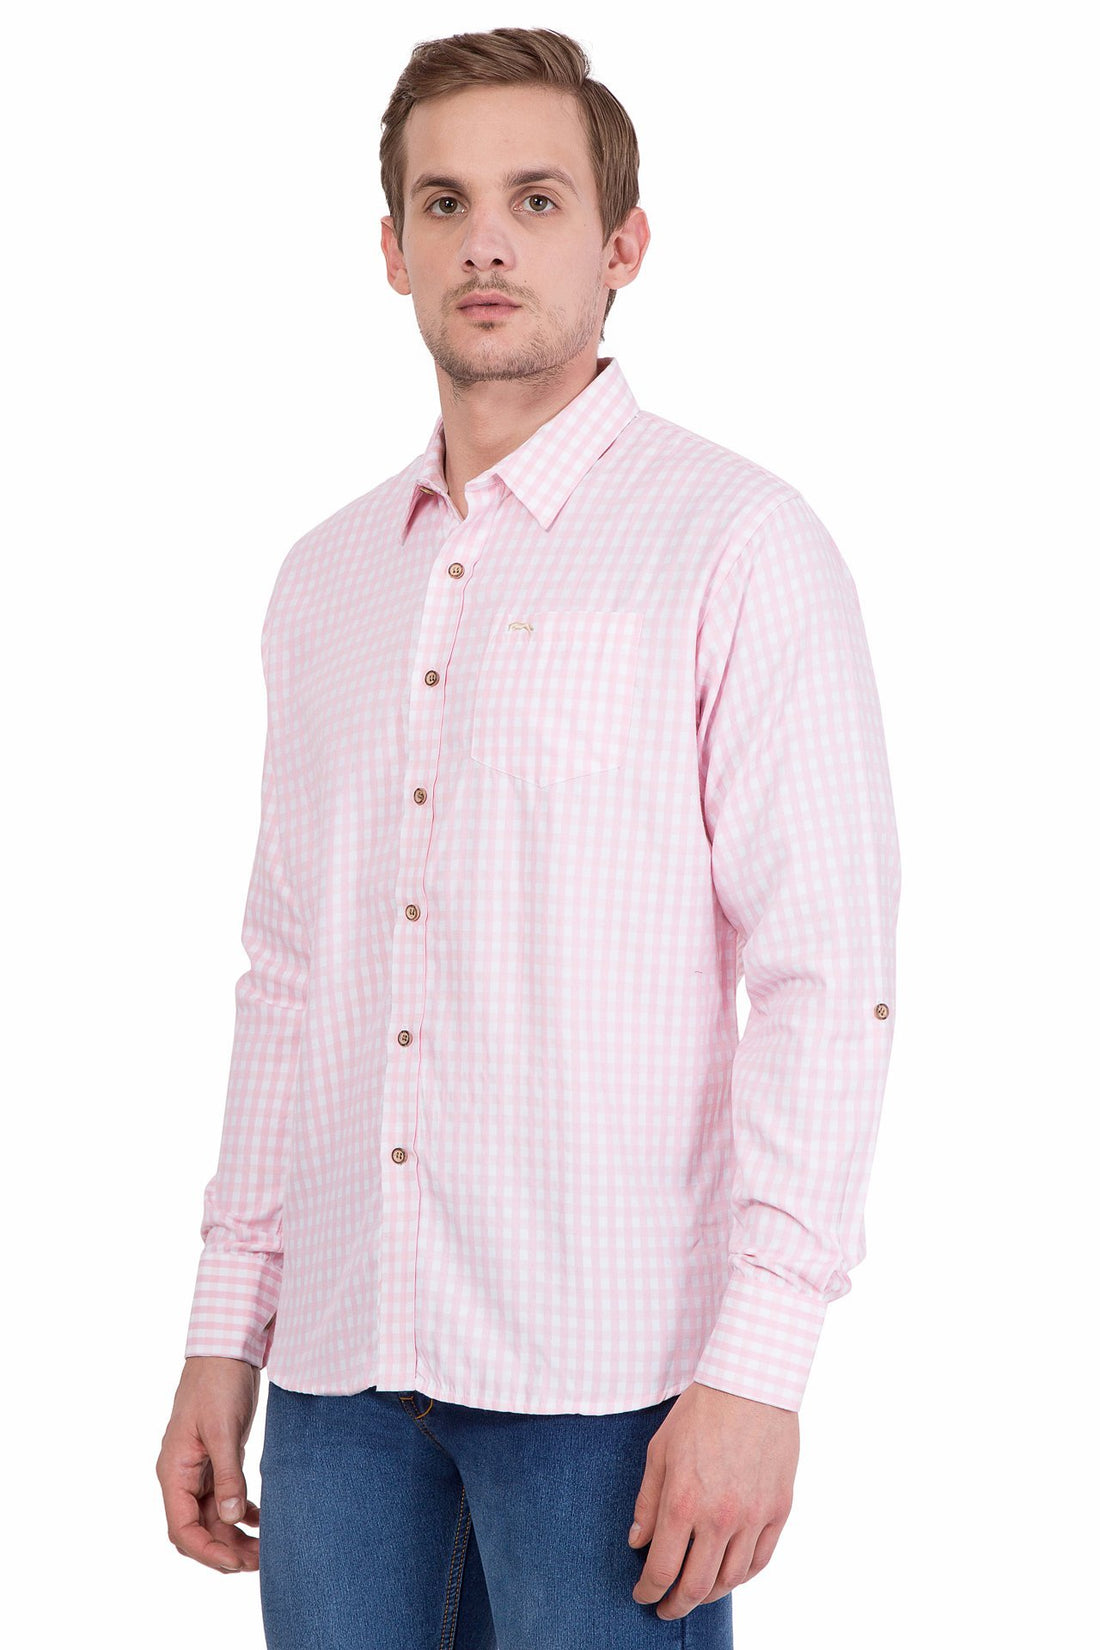 Slim Fit Long Sleeve Pink And White Check Casual Shirt - JUMP USA (1568785268778)